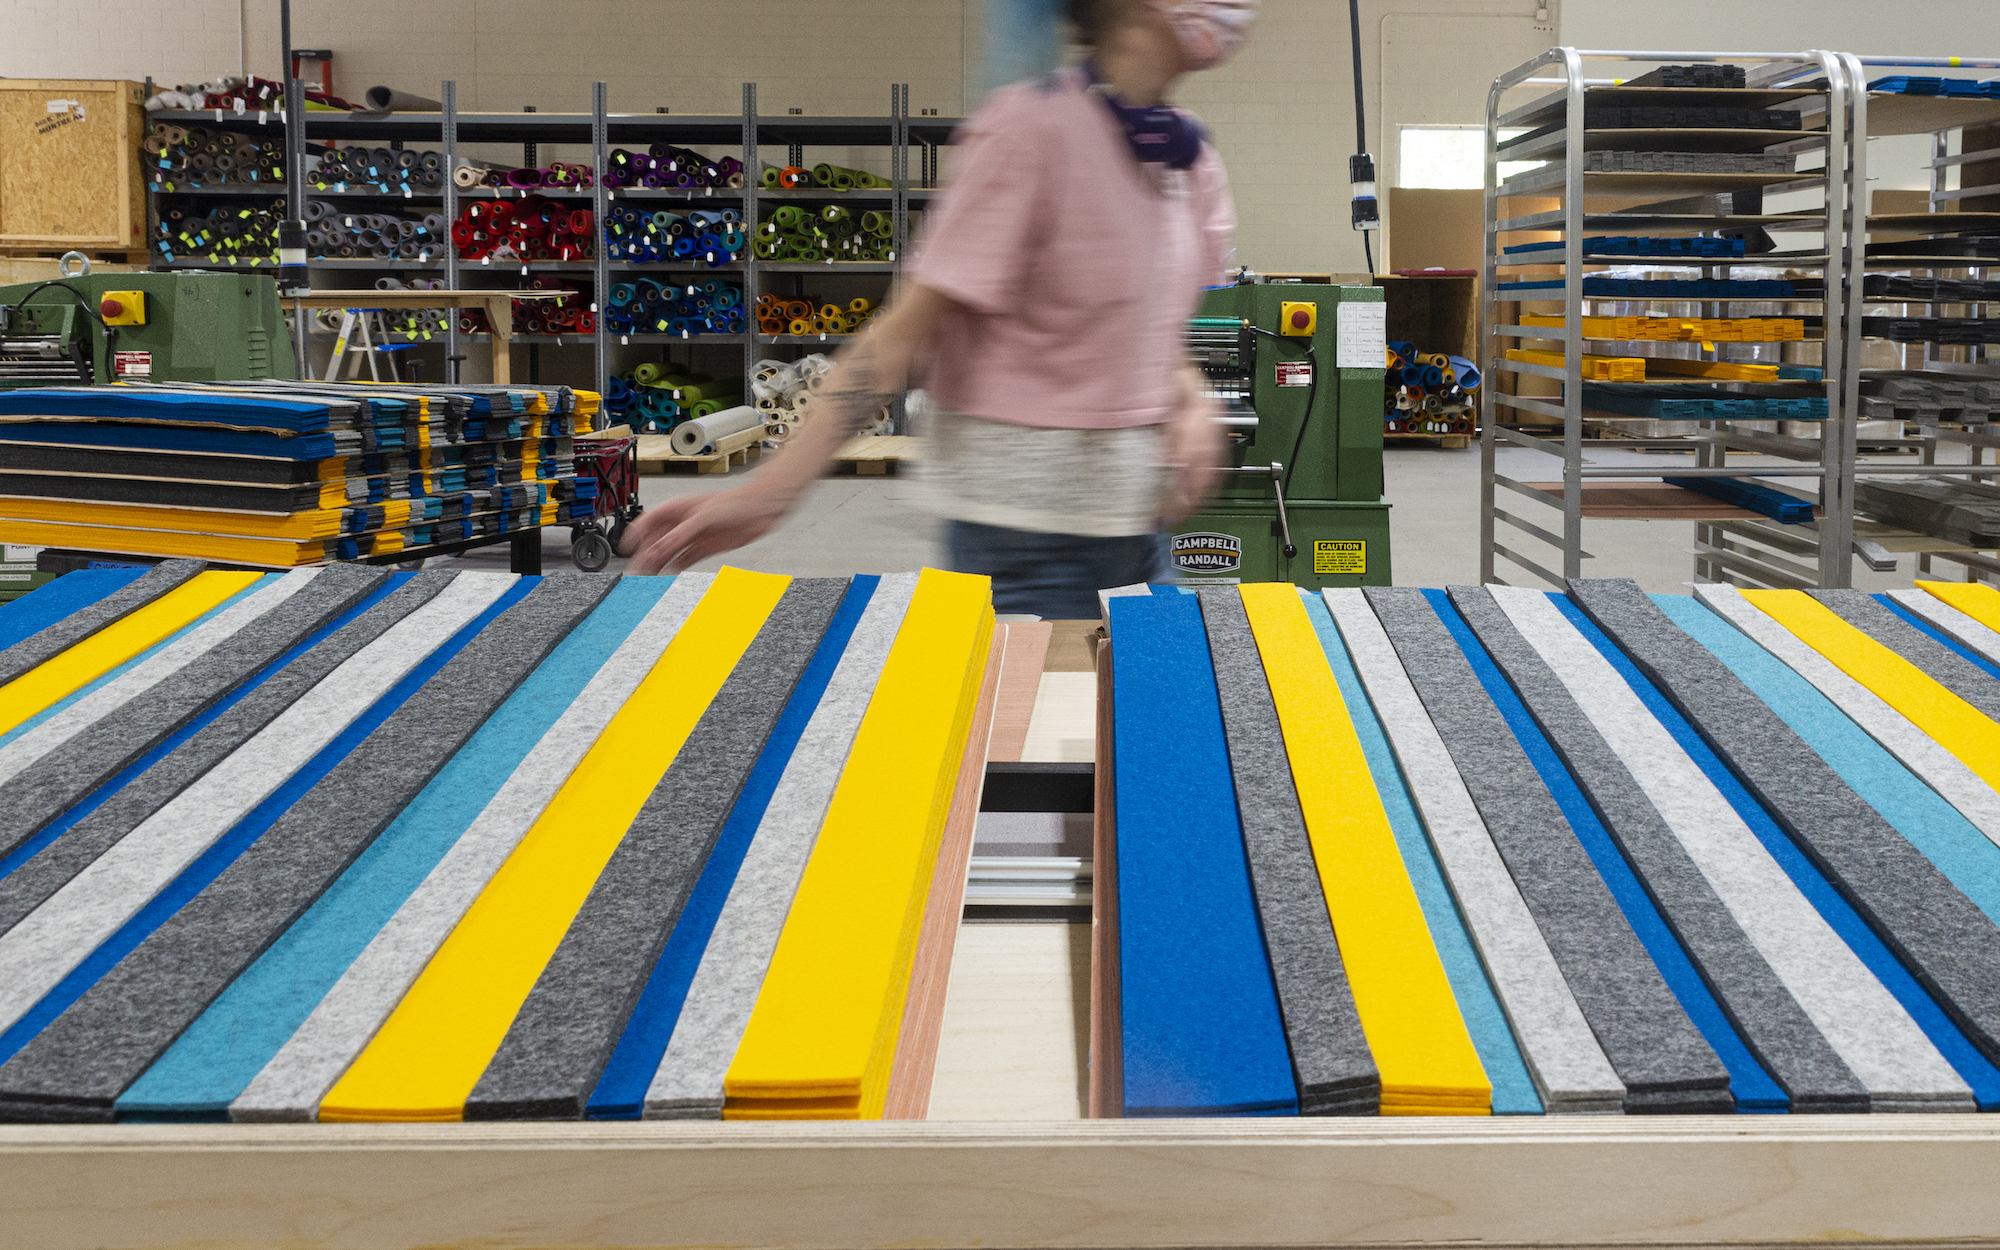 A person in a pink shirt walks past a table with blue, yellow, and gray strips of felt laid out. In the background are shelves with rolls of colorful felt